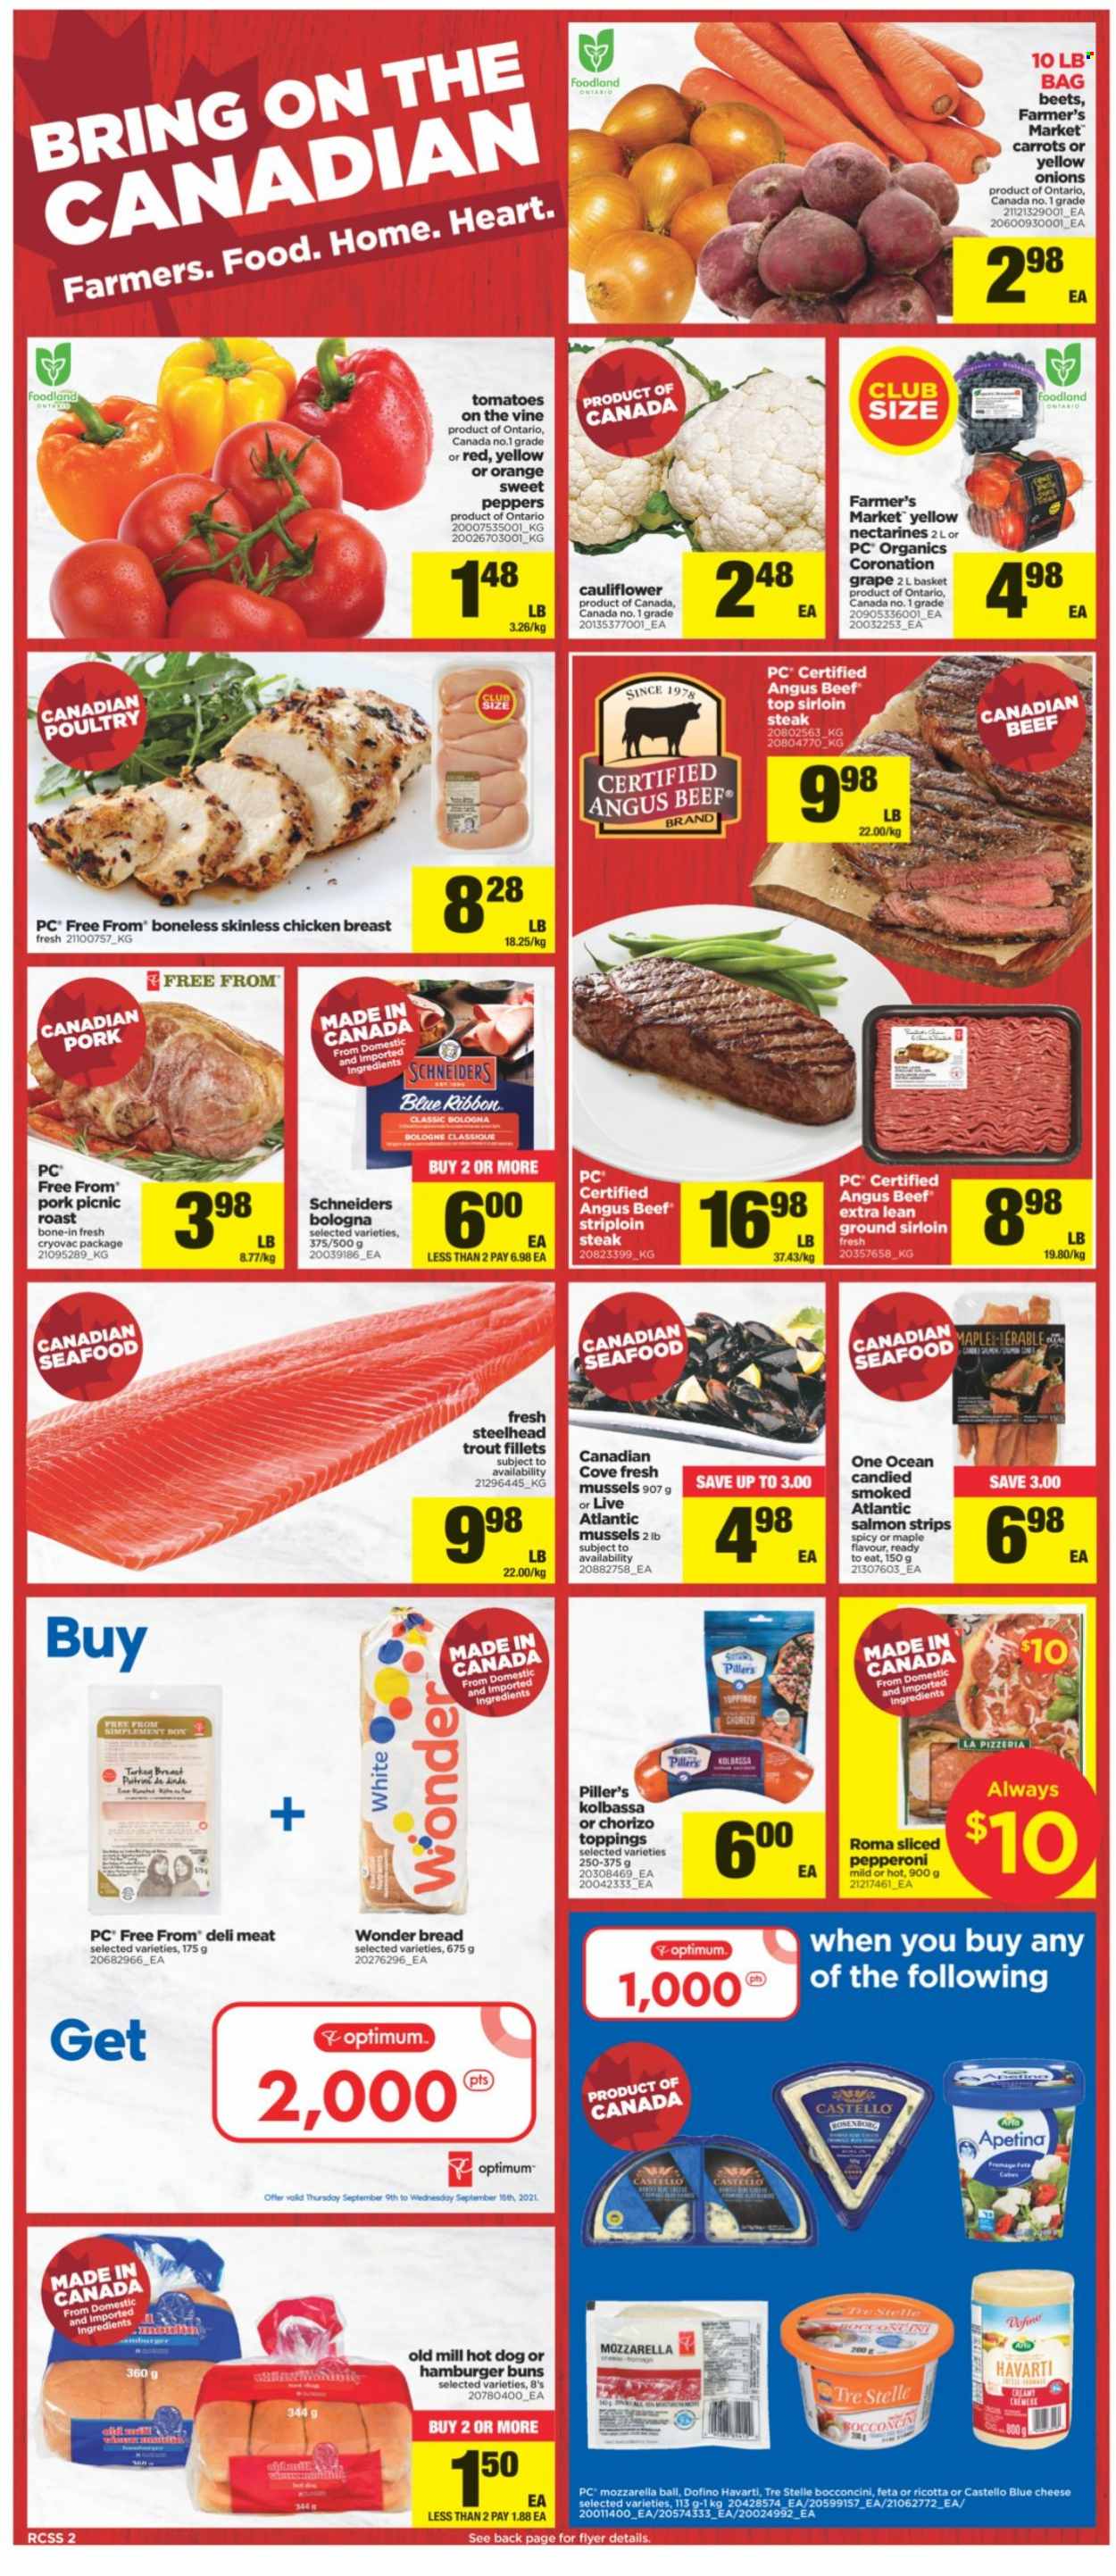 thumbnail - Real Canadian Superstore Flyer - September 09, 2021 - September 15, 2021 - Sales products - Blue Ribbon, buns, burger buns, cauliflower, sweet peppers, onion, nectarines, mussels, salmon, trout, seafood, hot dog, bologna sausage, pepperoni, blue cheese, bocconcini, Havarti, cheese, feta, L'Or, chicken breasts, chicken, beef meat, beef sirloin, sirloin steak, striploin steak, Optimum, basket, mozzarella, ricotta, chorizo, steak, oranges. Page 2.